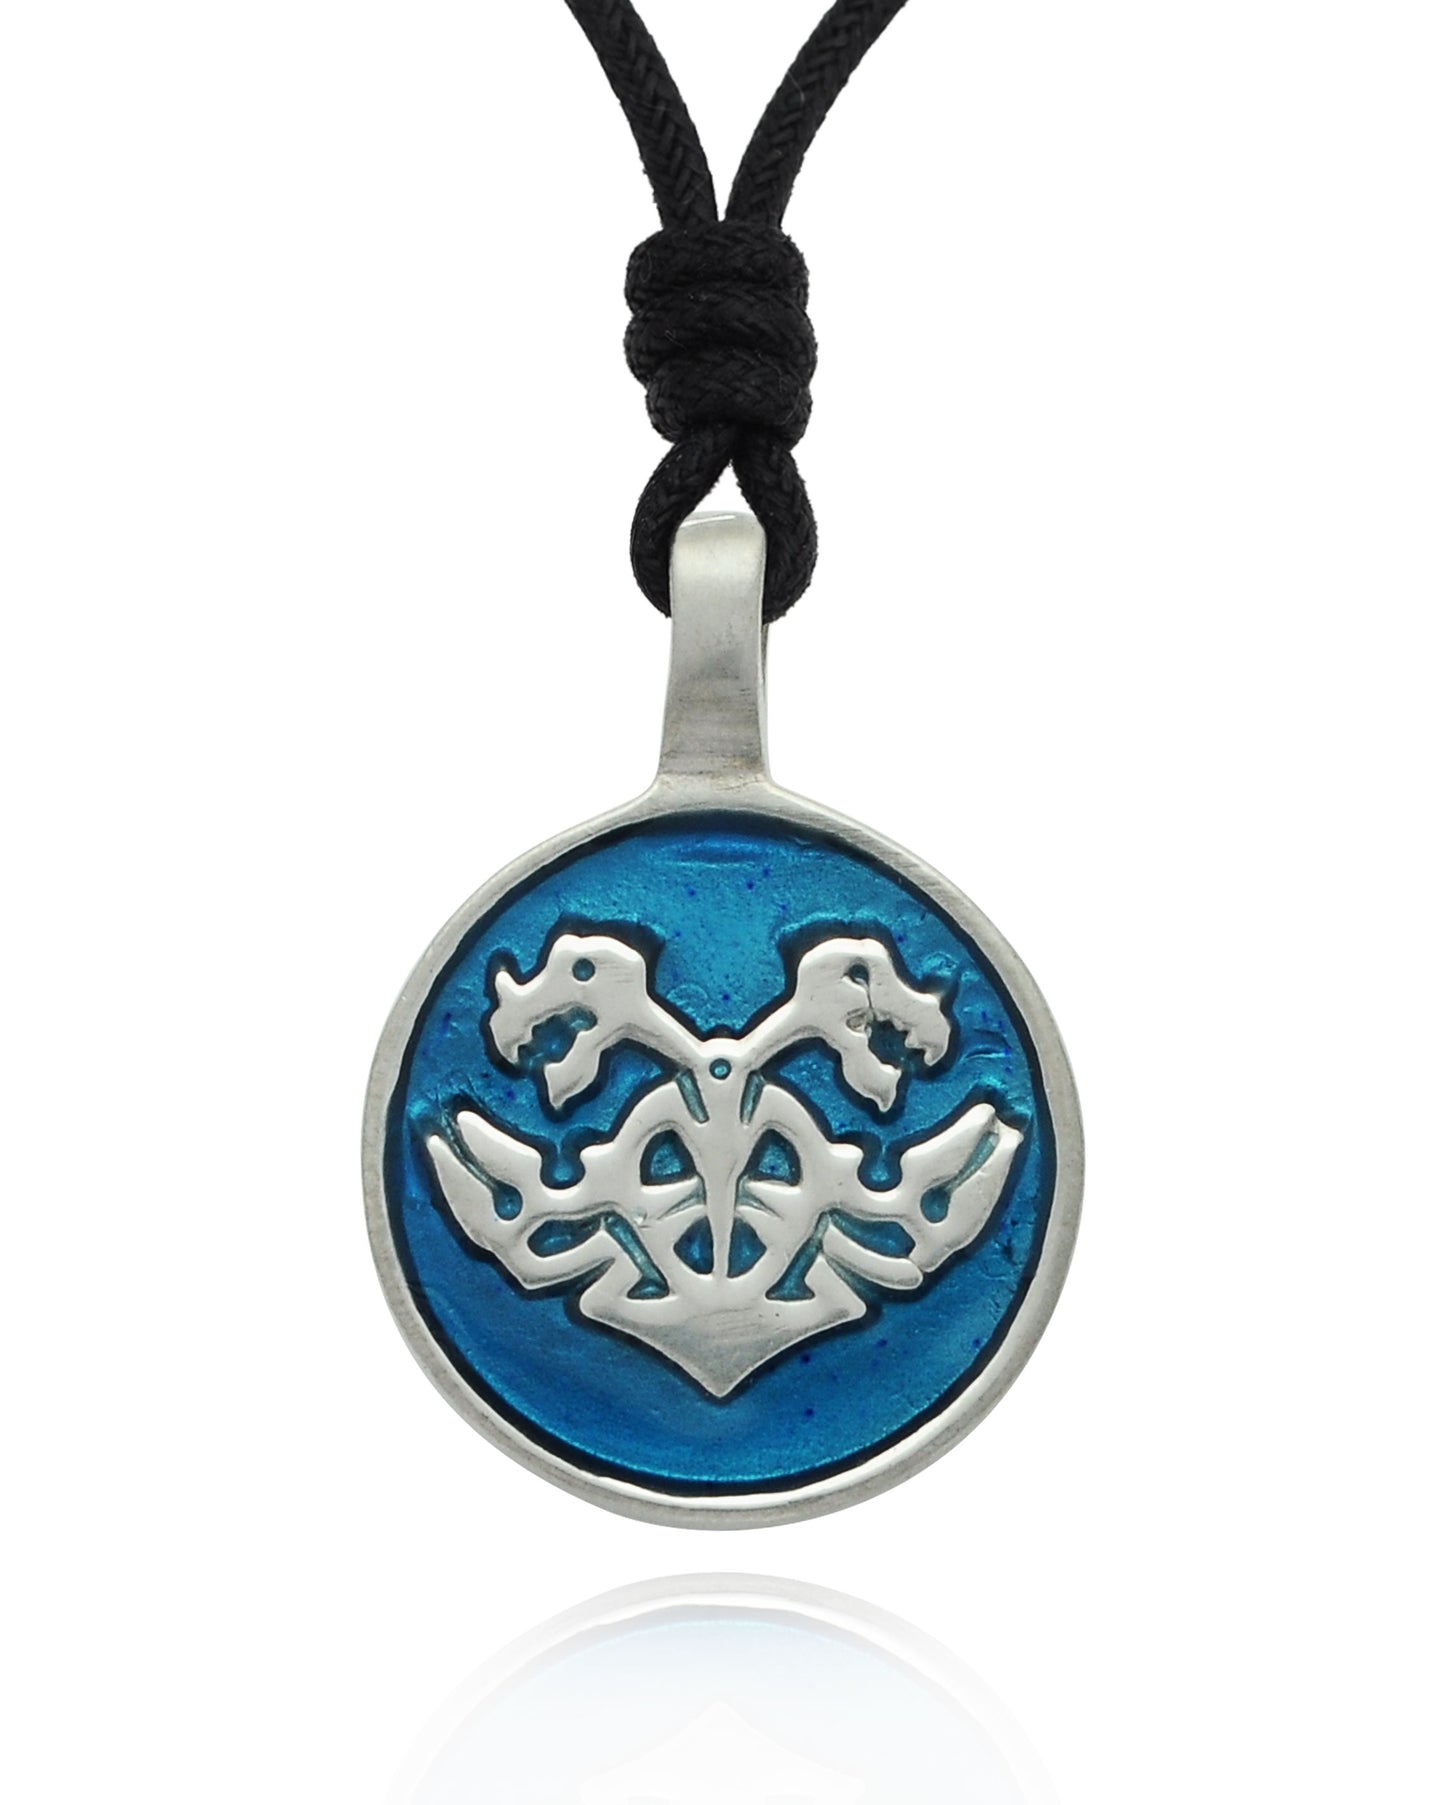 Colorful Dragon Crest Amulet Silver Pewter Charm Necklace Pendant Jewelry